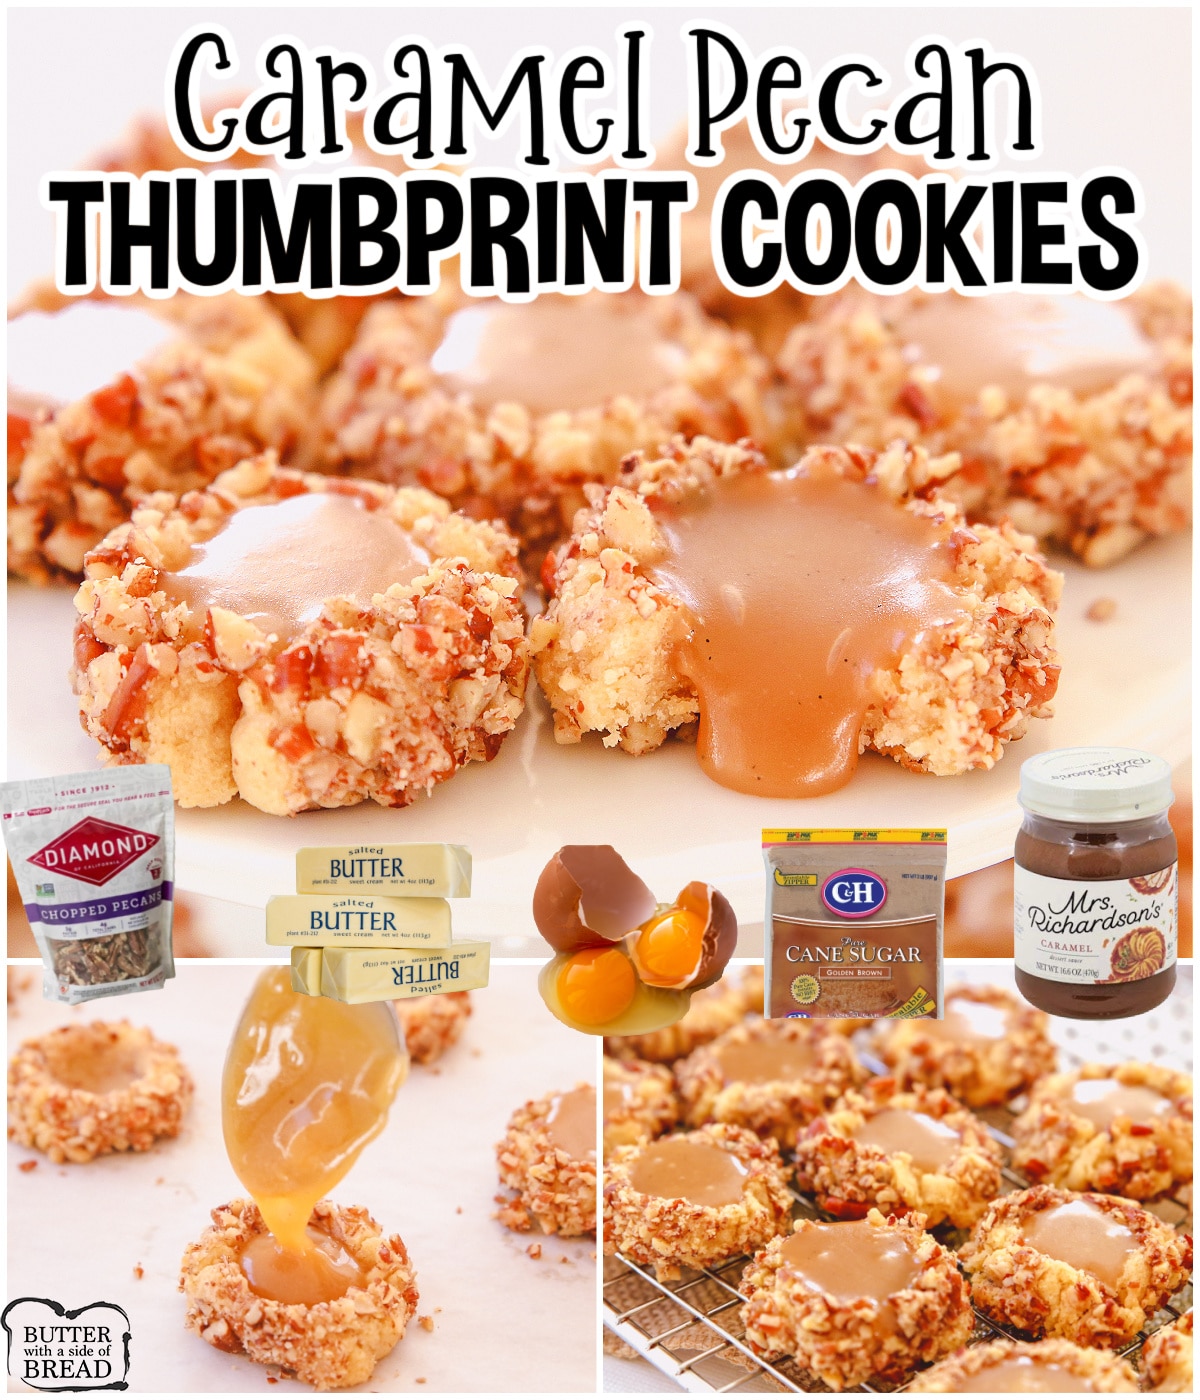 Caramel Pecan Thumbprint Cookies are buttery cookies rolled in chopped pecans, baked then filled with warm caramel! Gooey caramel thumbprint cookies perfect for holiday dessert trays!